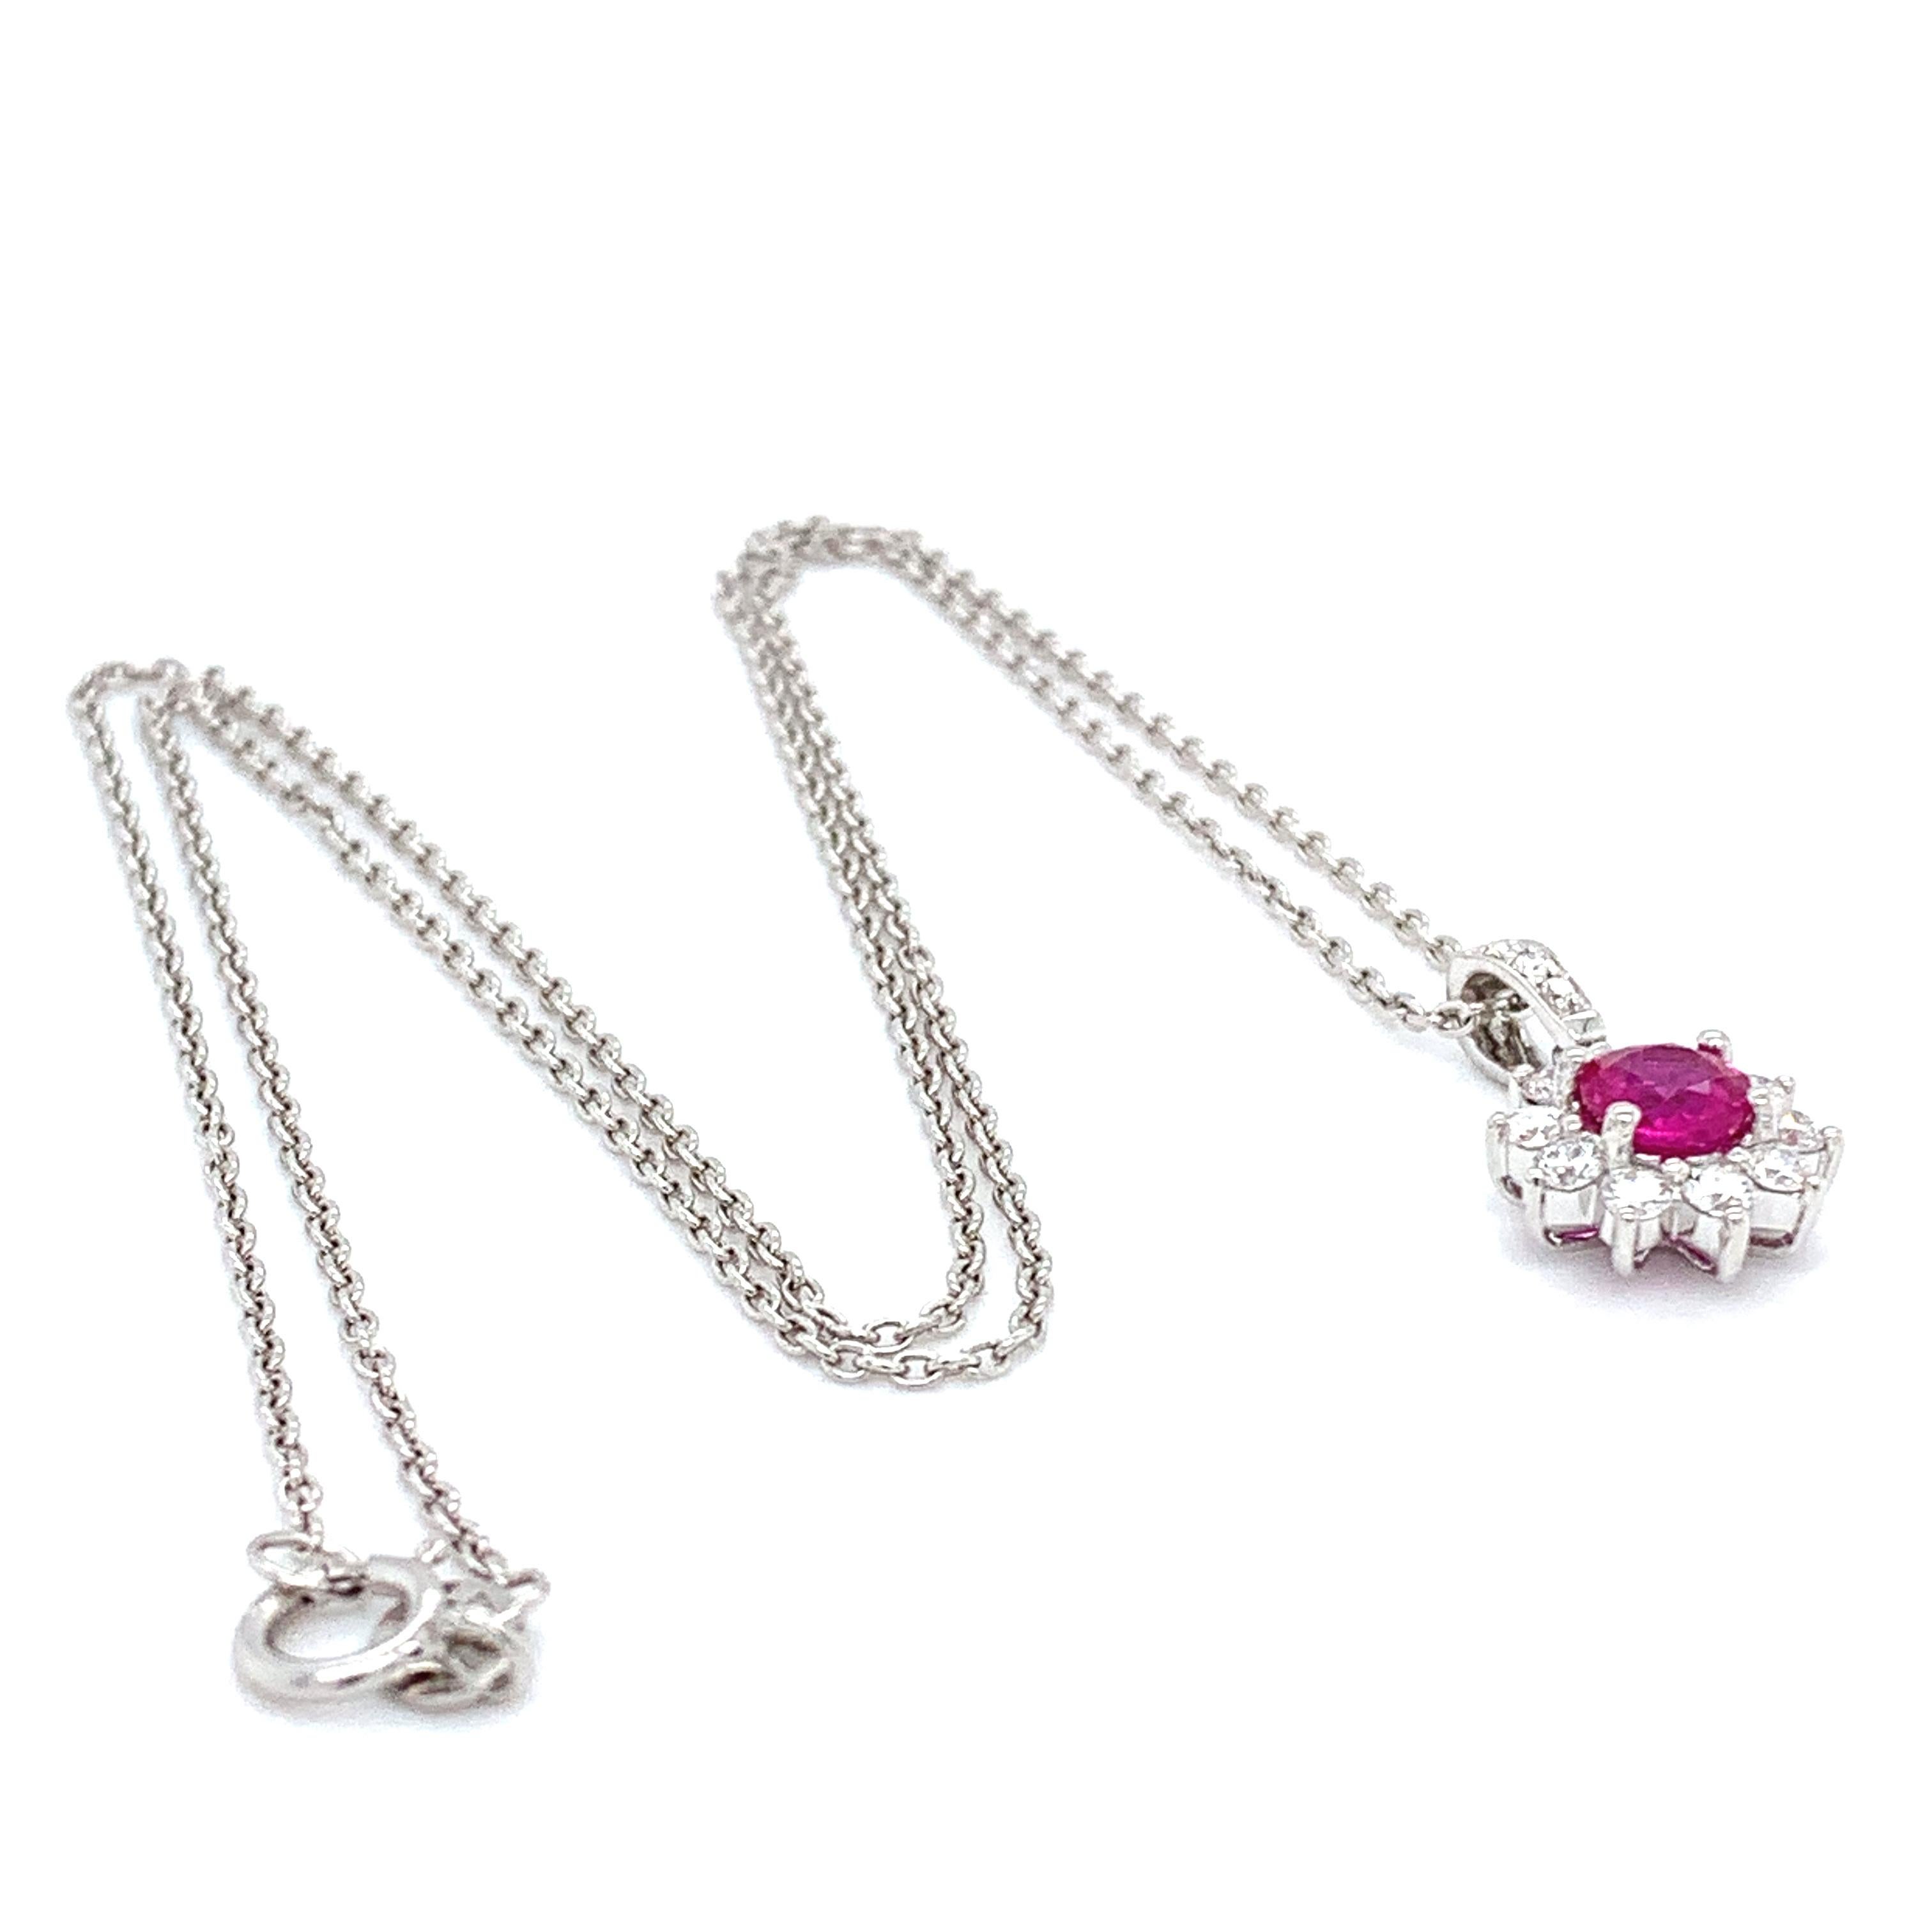 Ruby diamonds art deco jewellery set 18k white gold
Composed of ruby and diamond cluster jewellery set in 18k white gold.
0.90ct Ruby natural gemstone and diamond cluster stud and earrings in 18k white gold.
Lenght of the pendant approximarely